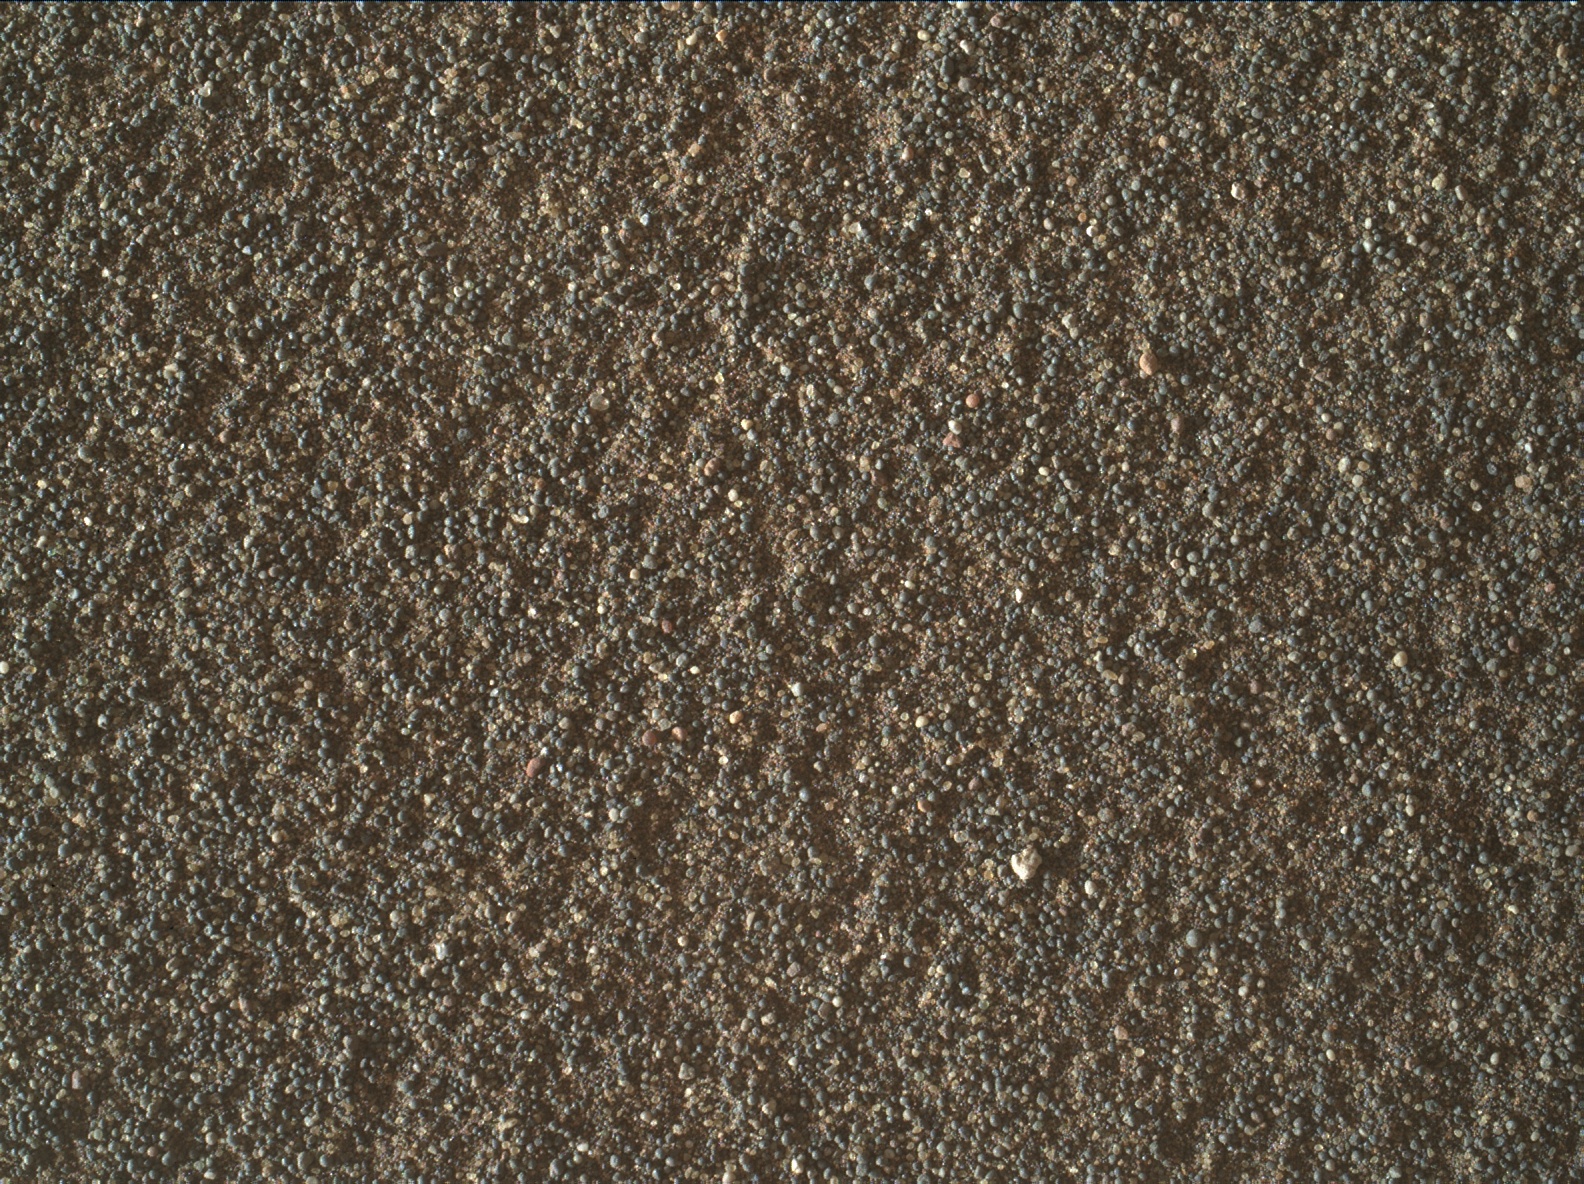 Nasa's Mars rover Curiosity acquired this image using its Mars Hand Lens Imager (MAHLI) on Sol 3078